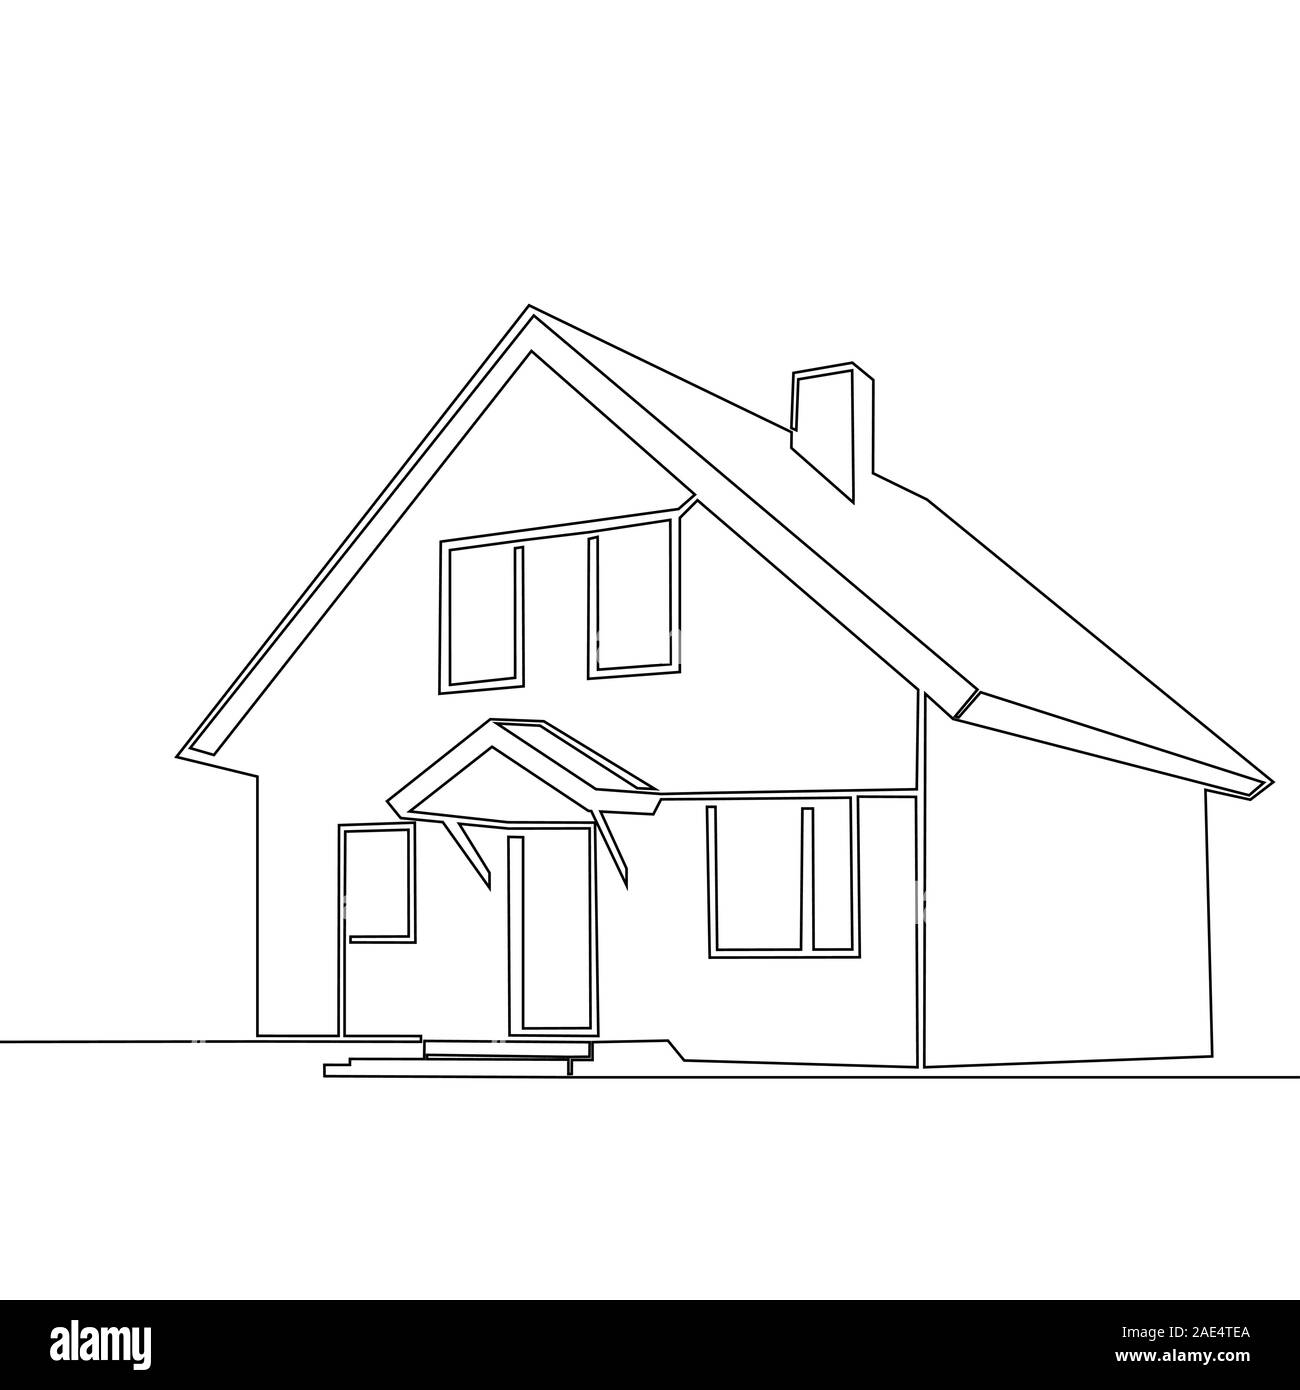 House Line Drawing Photos and Images | Shutterstock